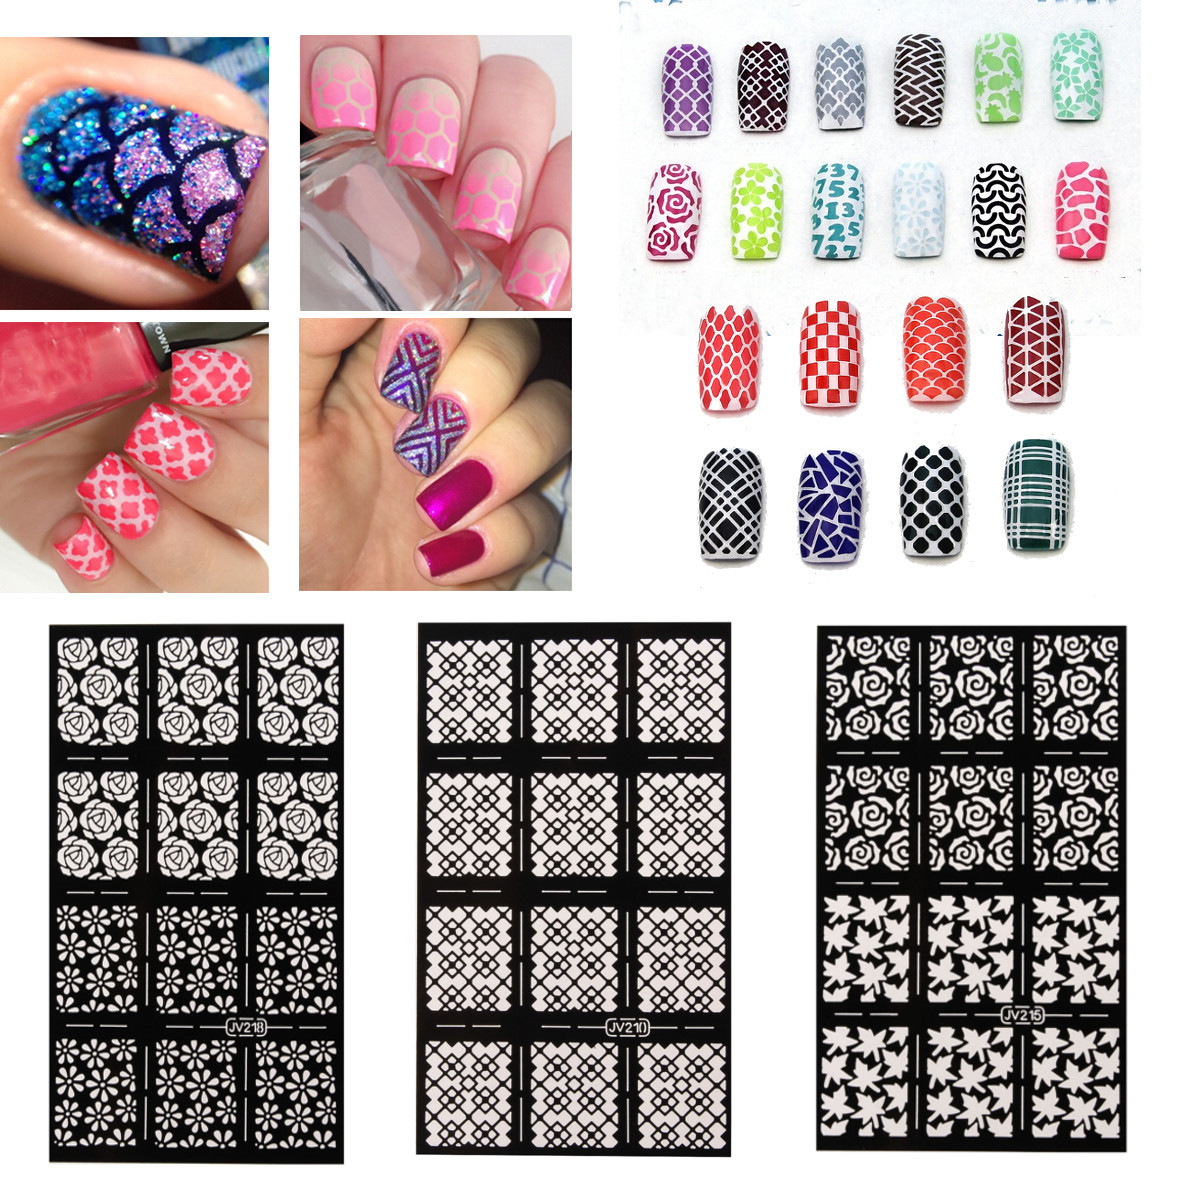 The 21 Best Ideas for Free Printable Nail Art Stencils Home, Family, Style and Art Ideas